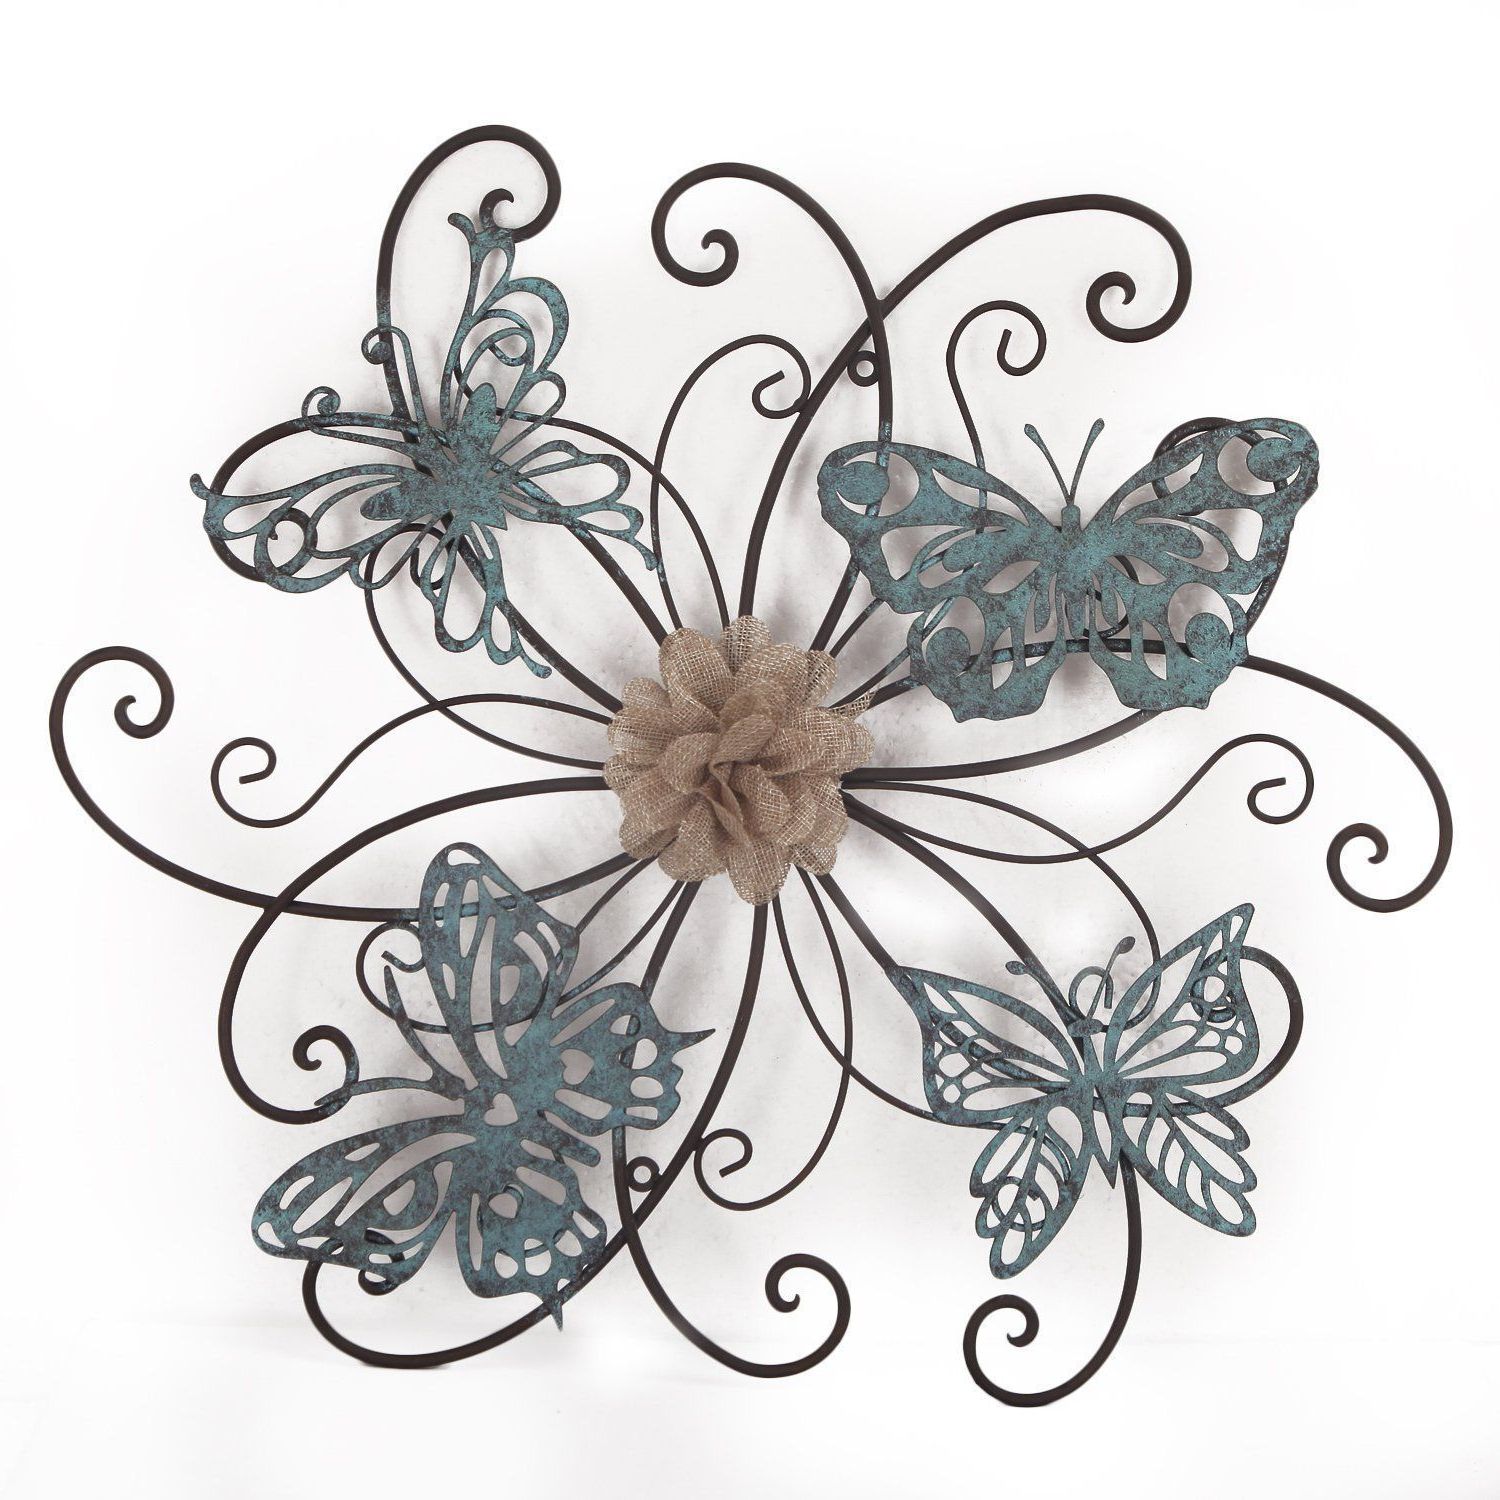 Current Flower And Butterfly Urban Design Metal Wall Decor Intended For Adeco Flower And Butterfly Urban Design Metal (grey) Wall Decor For (View 1 of 20)